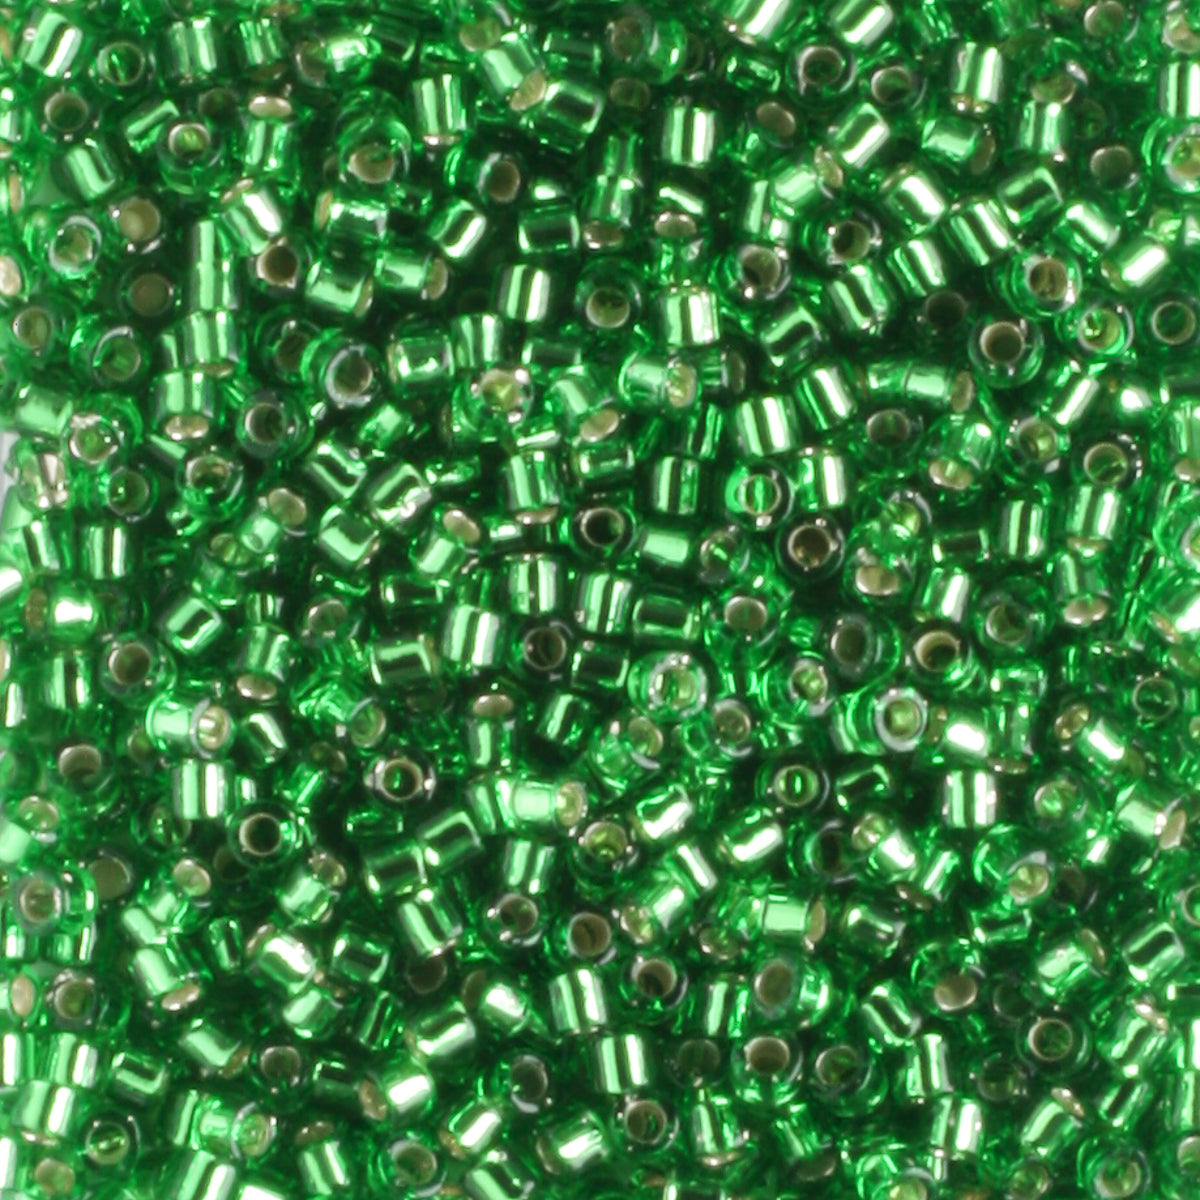 DB0046 Silver Lined Green - 5 grams